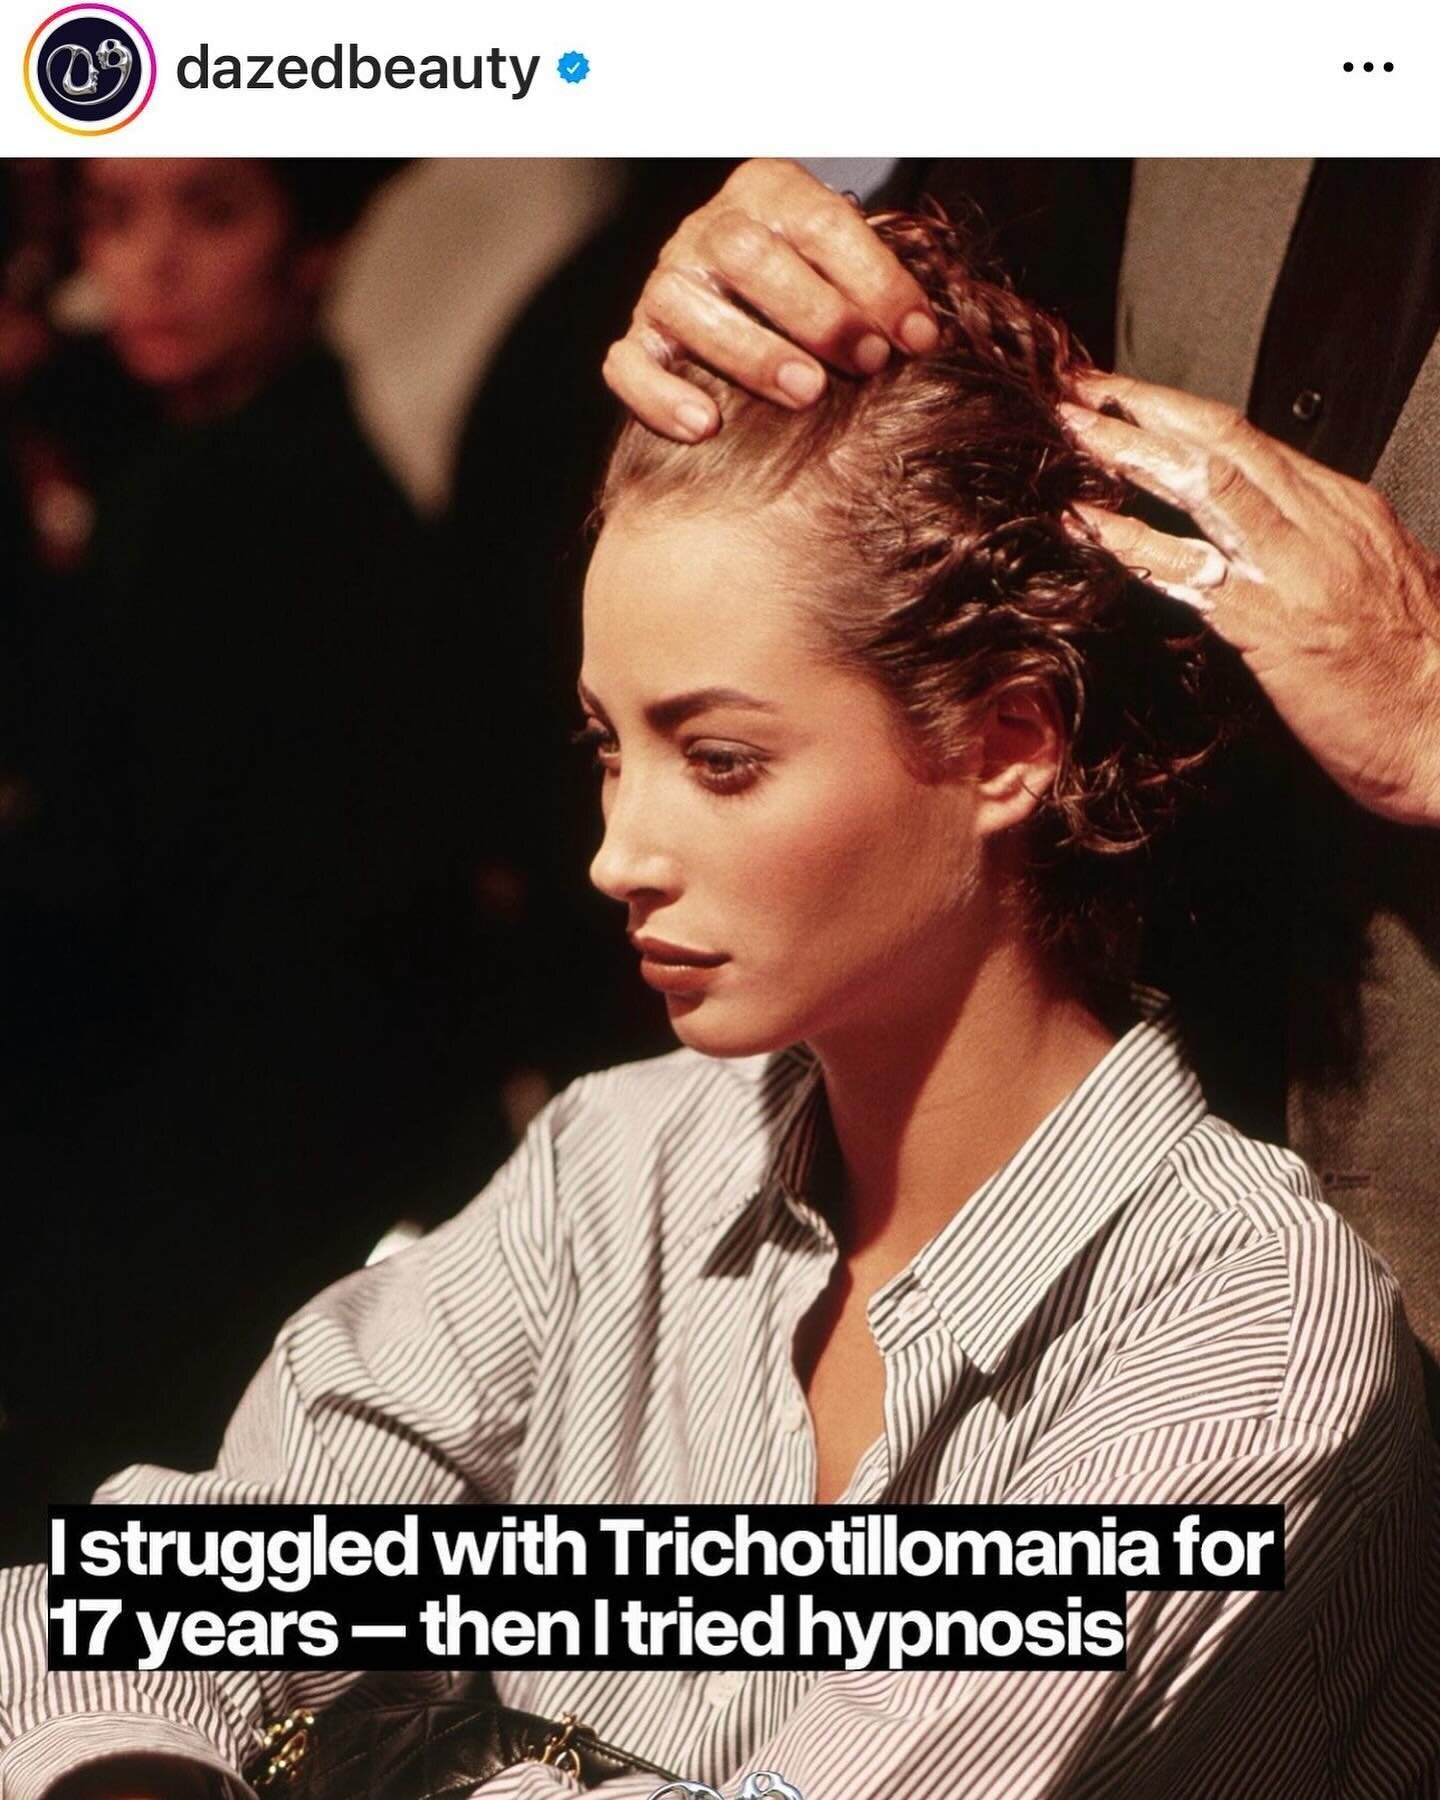 I worked with a wonderful journalist for @dazedbeauty to help her with trichotillomania which for those of you that don&rsquo;t know is a compulsion linked to a pulling of the hair from the root. Did it work? Yes, but if you want more details and to 